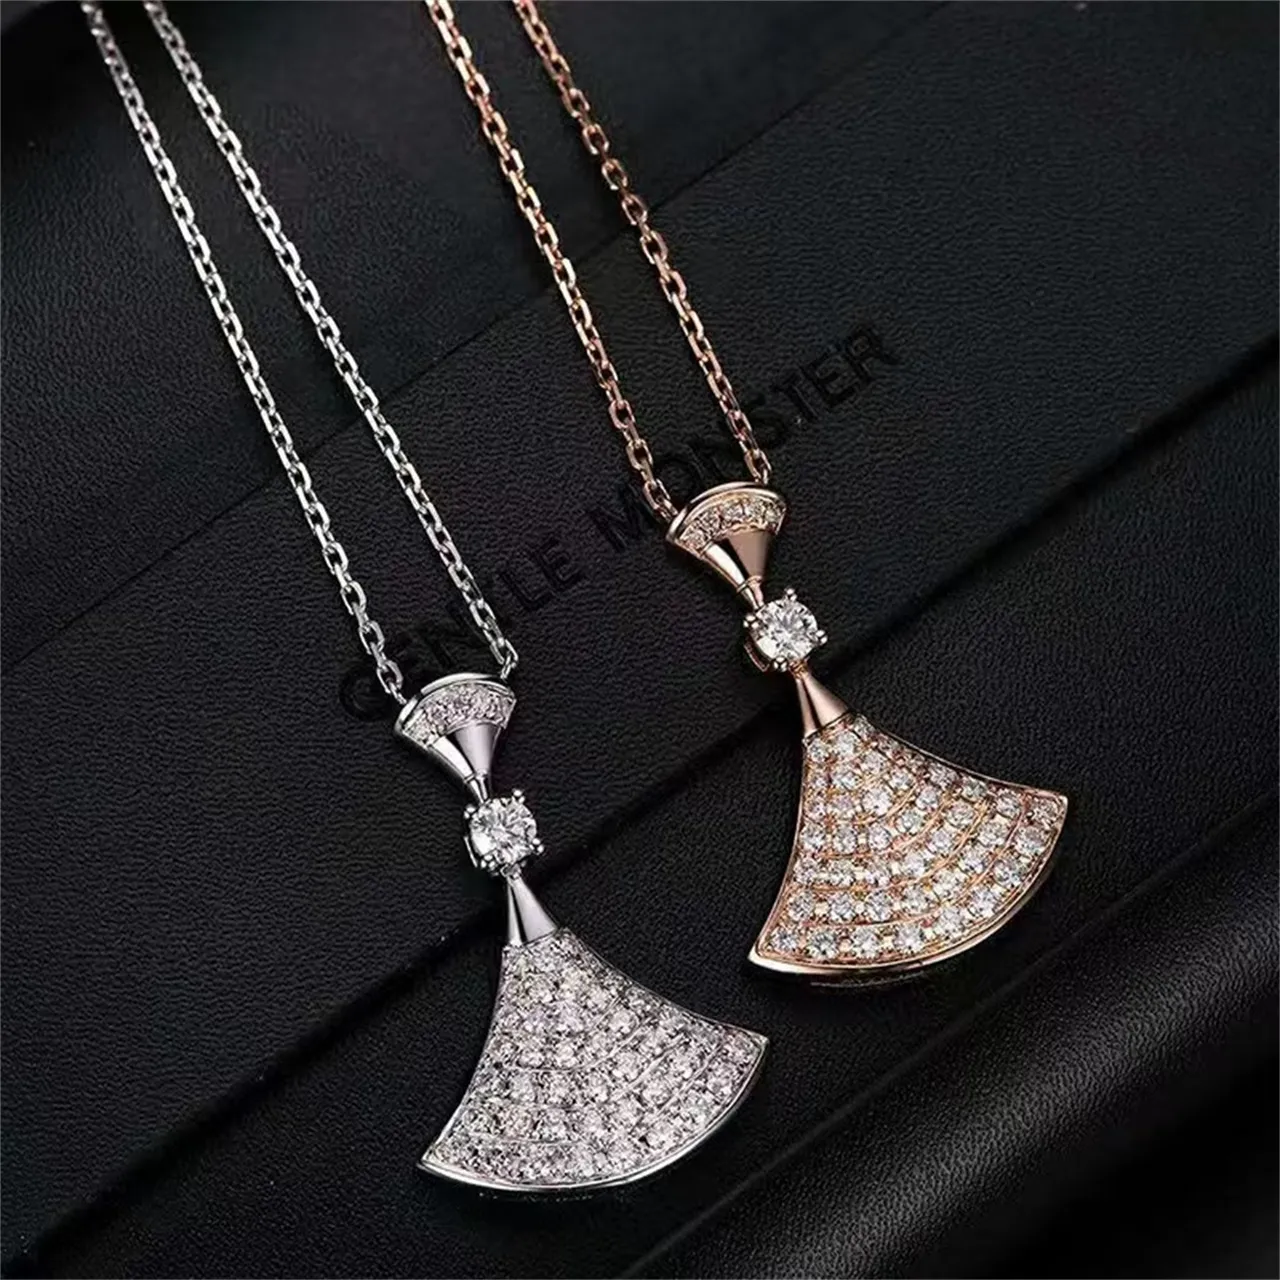 New dress dimond Pendant Necklaces for classical women Elegant Necklace Highly Quality Choker chains Designer Jewelry 18K Plated gold girls